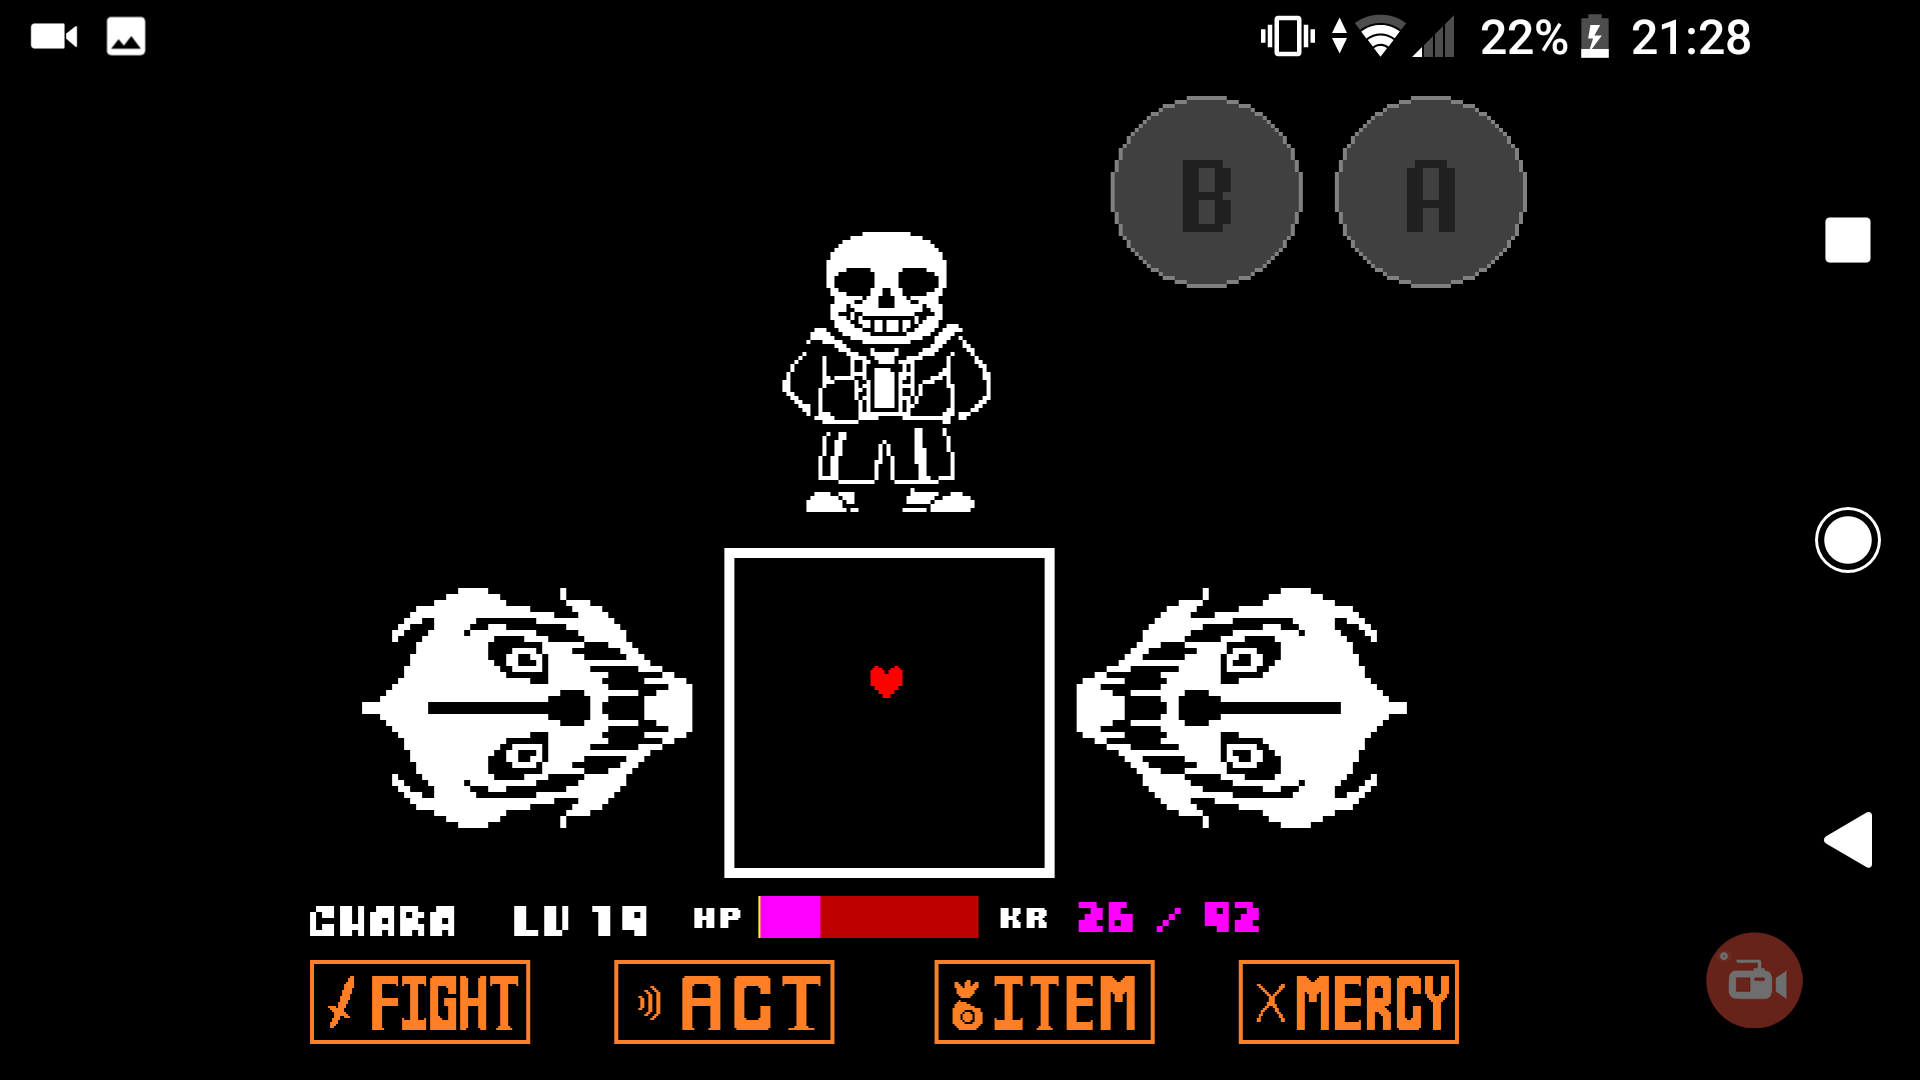 Sans Undertale Game fight Run APK for Android Download